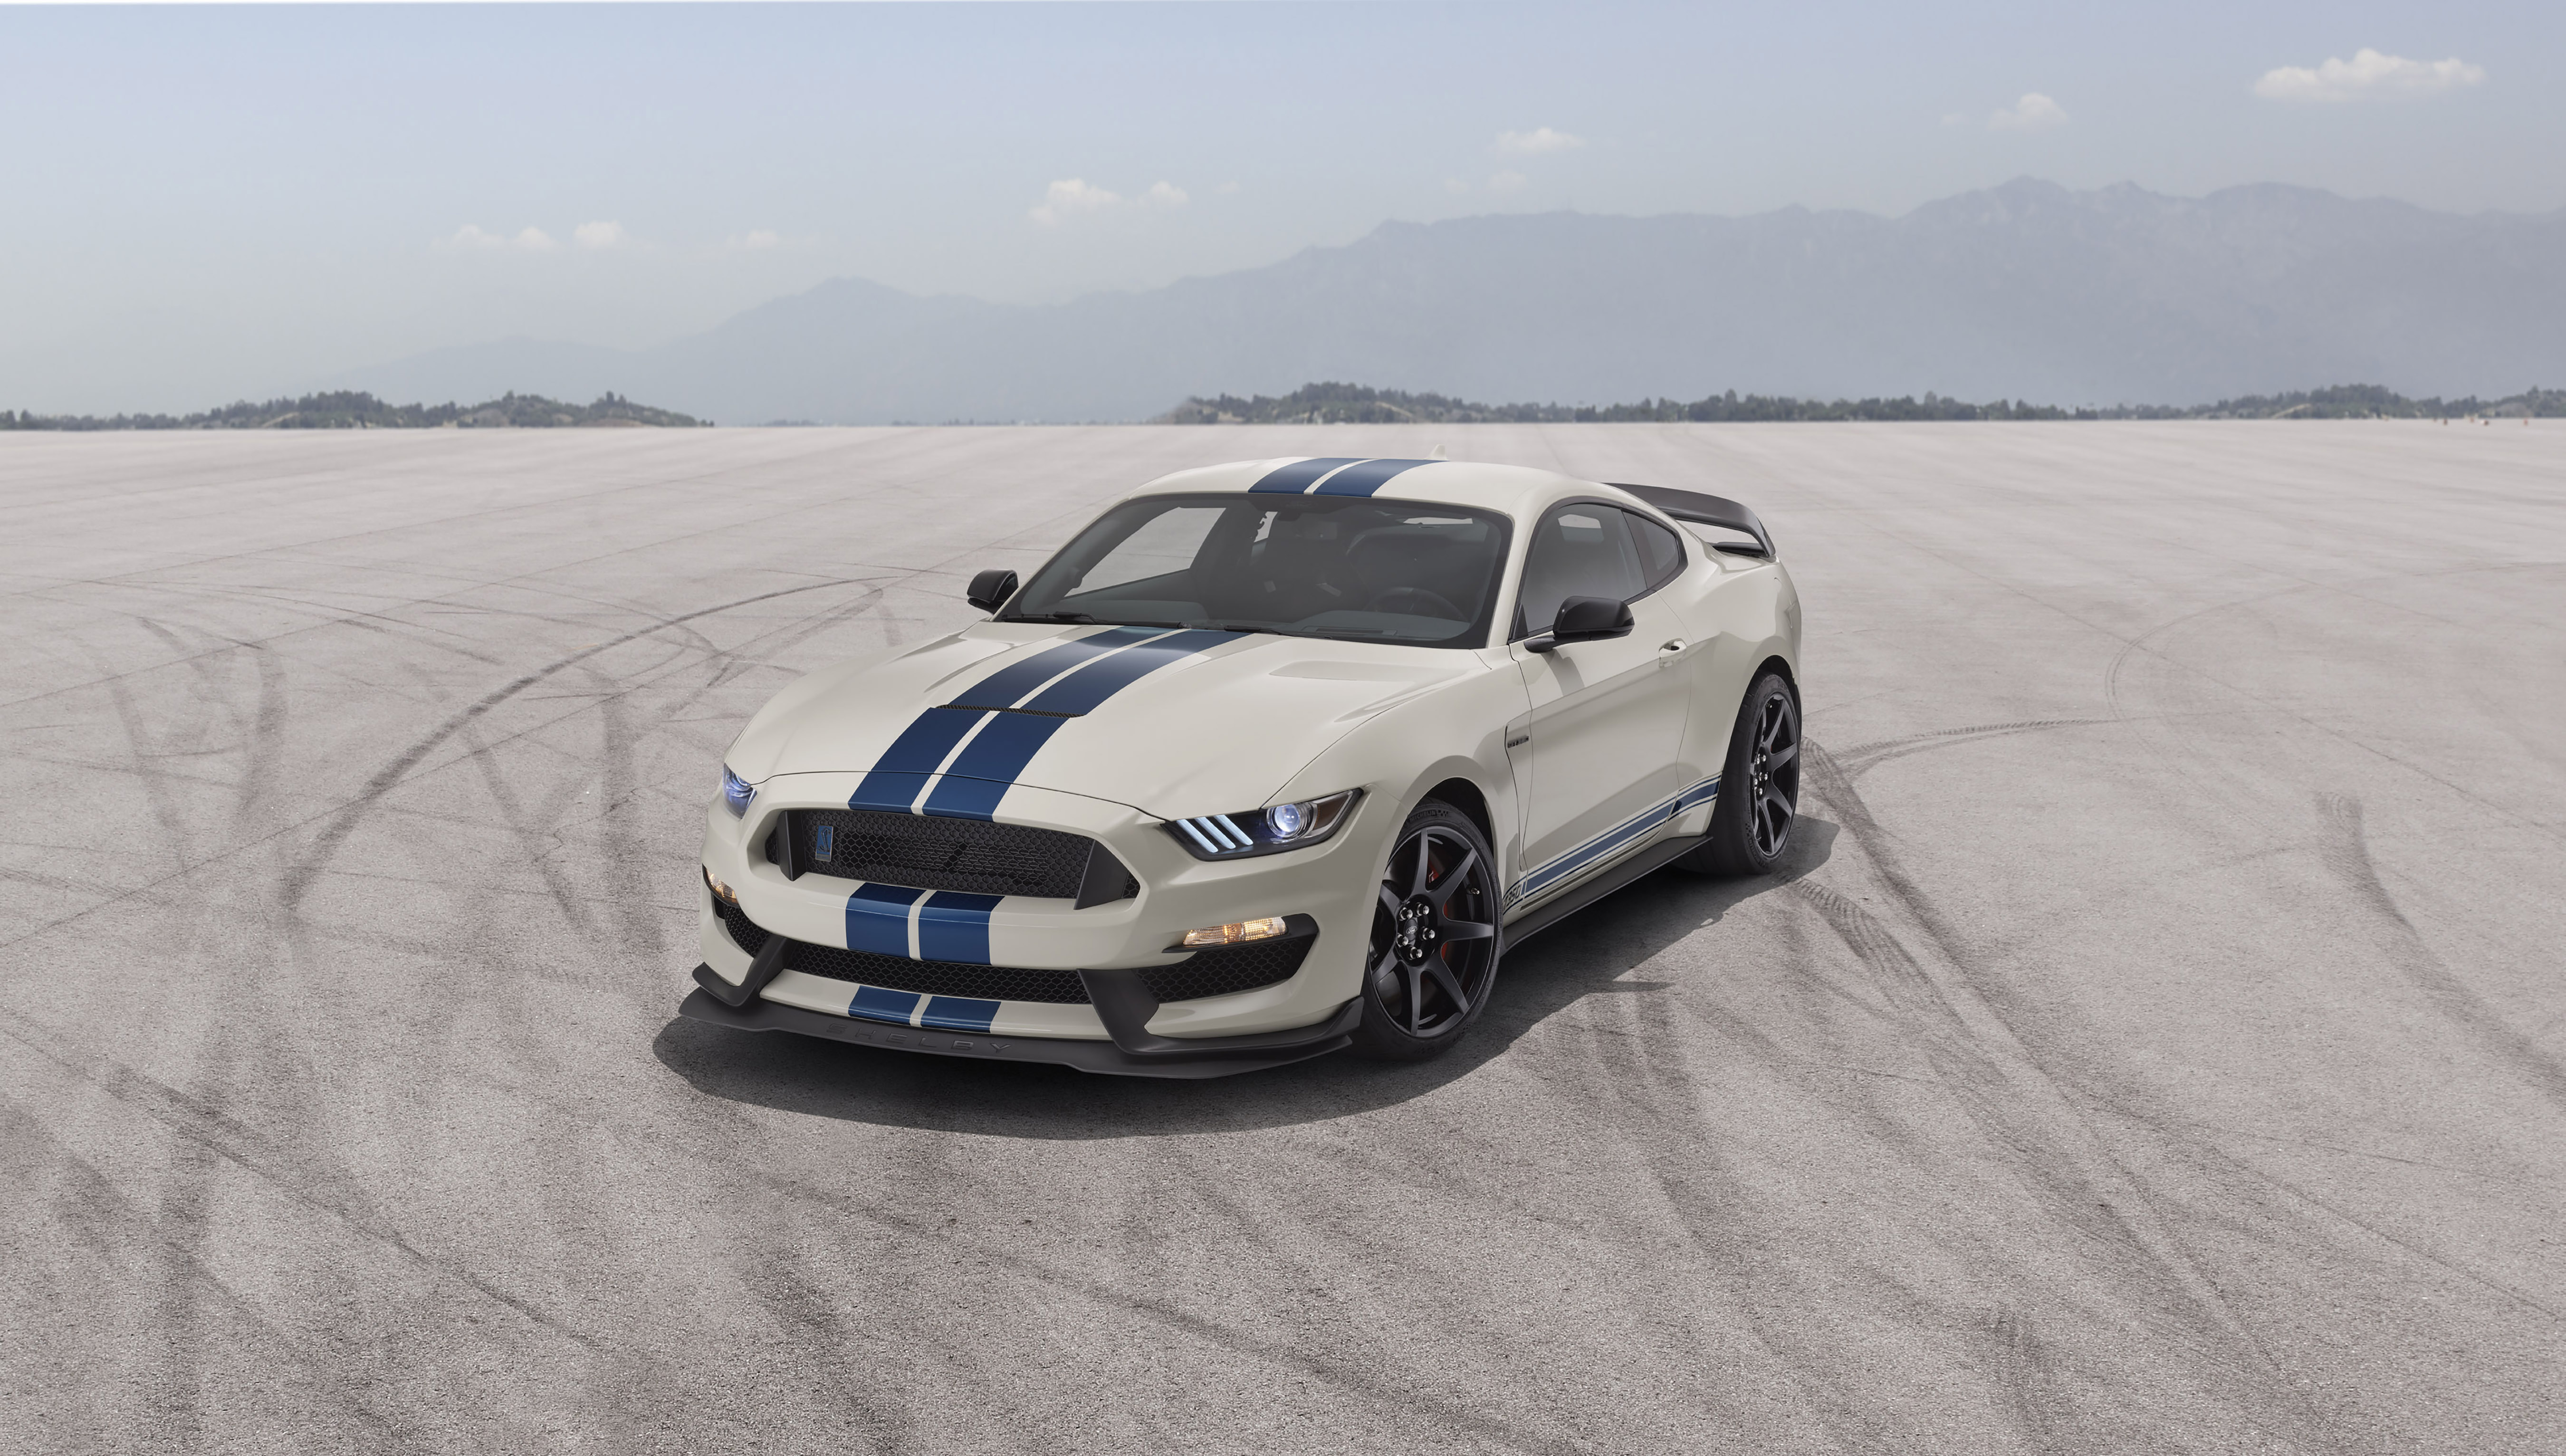 Car Ford Ford Mustang Ford Mustang Shelby Ford Mustang Shelby Gt350 Muscle Car Vehicle White Car 5400x3064